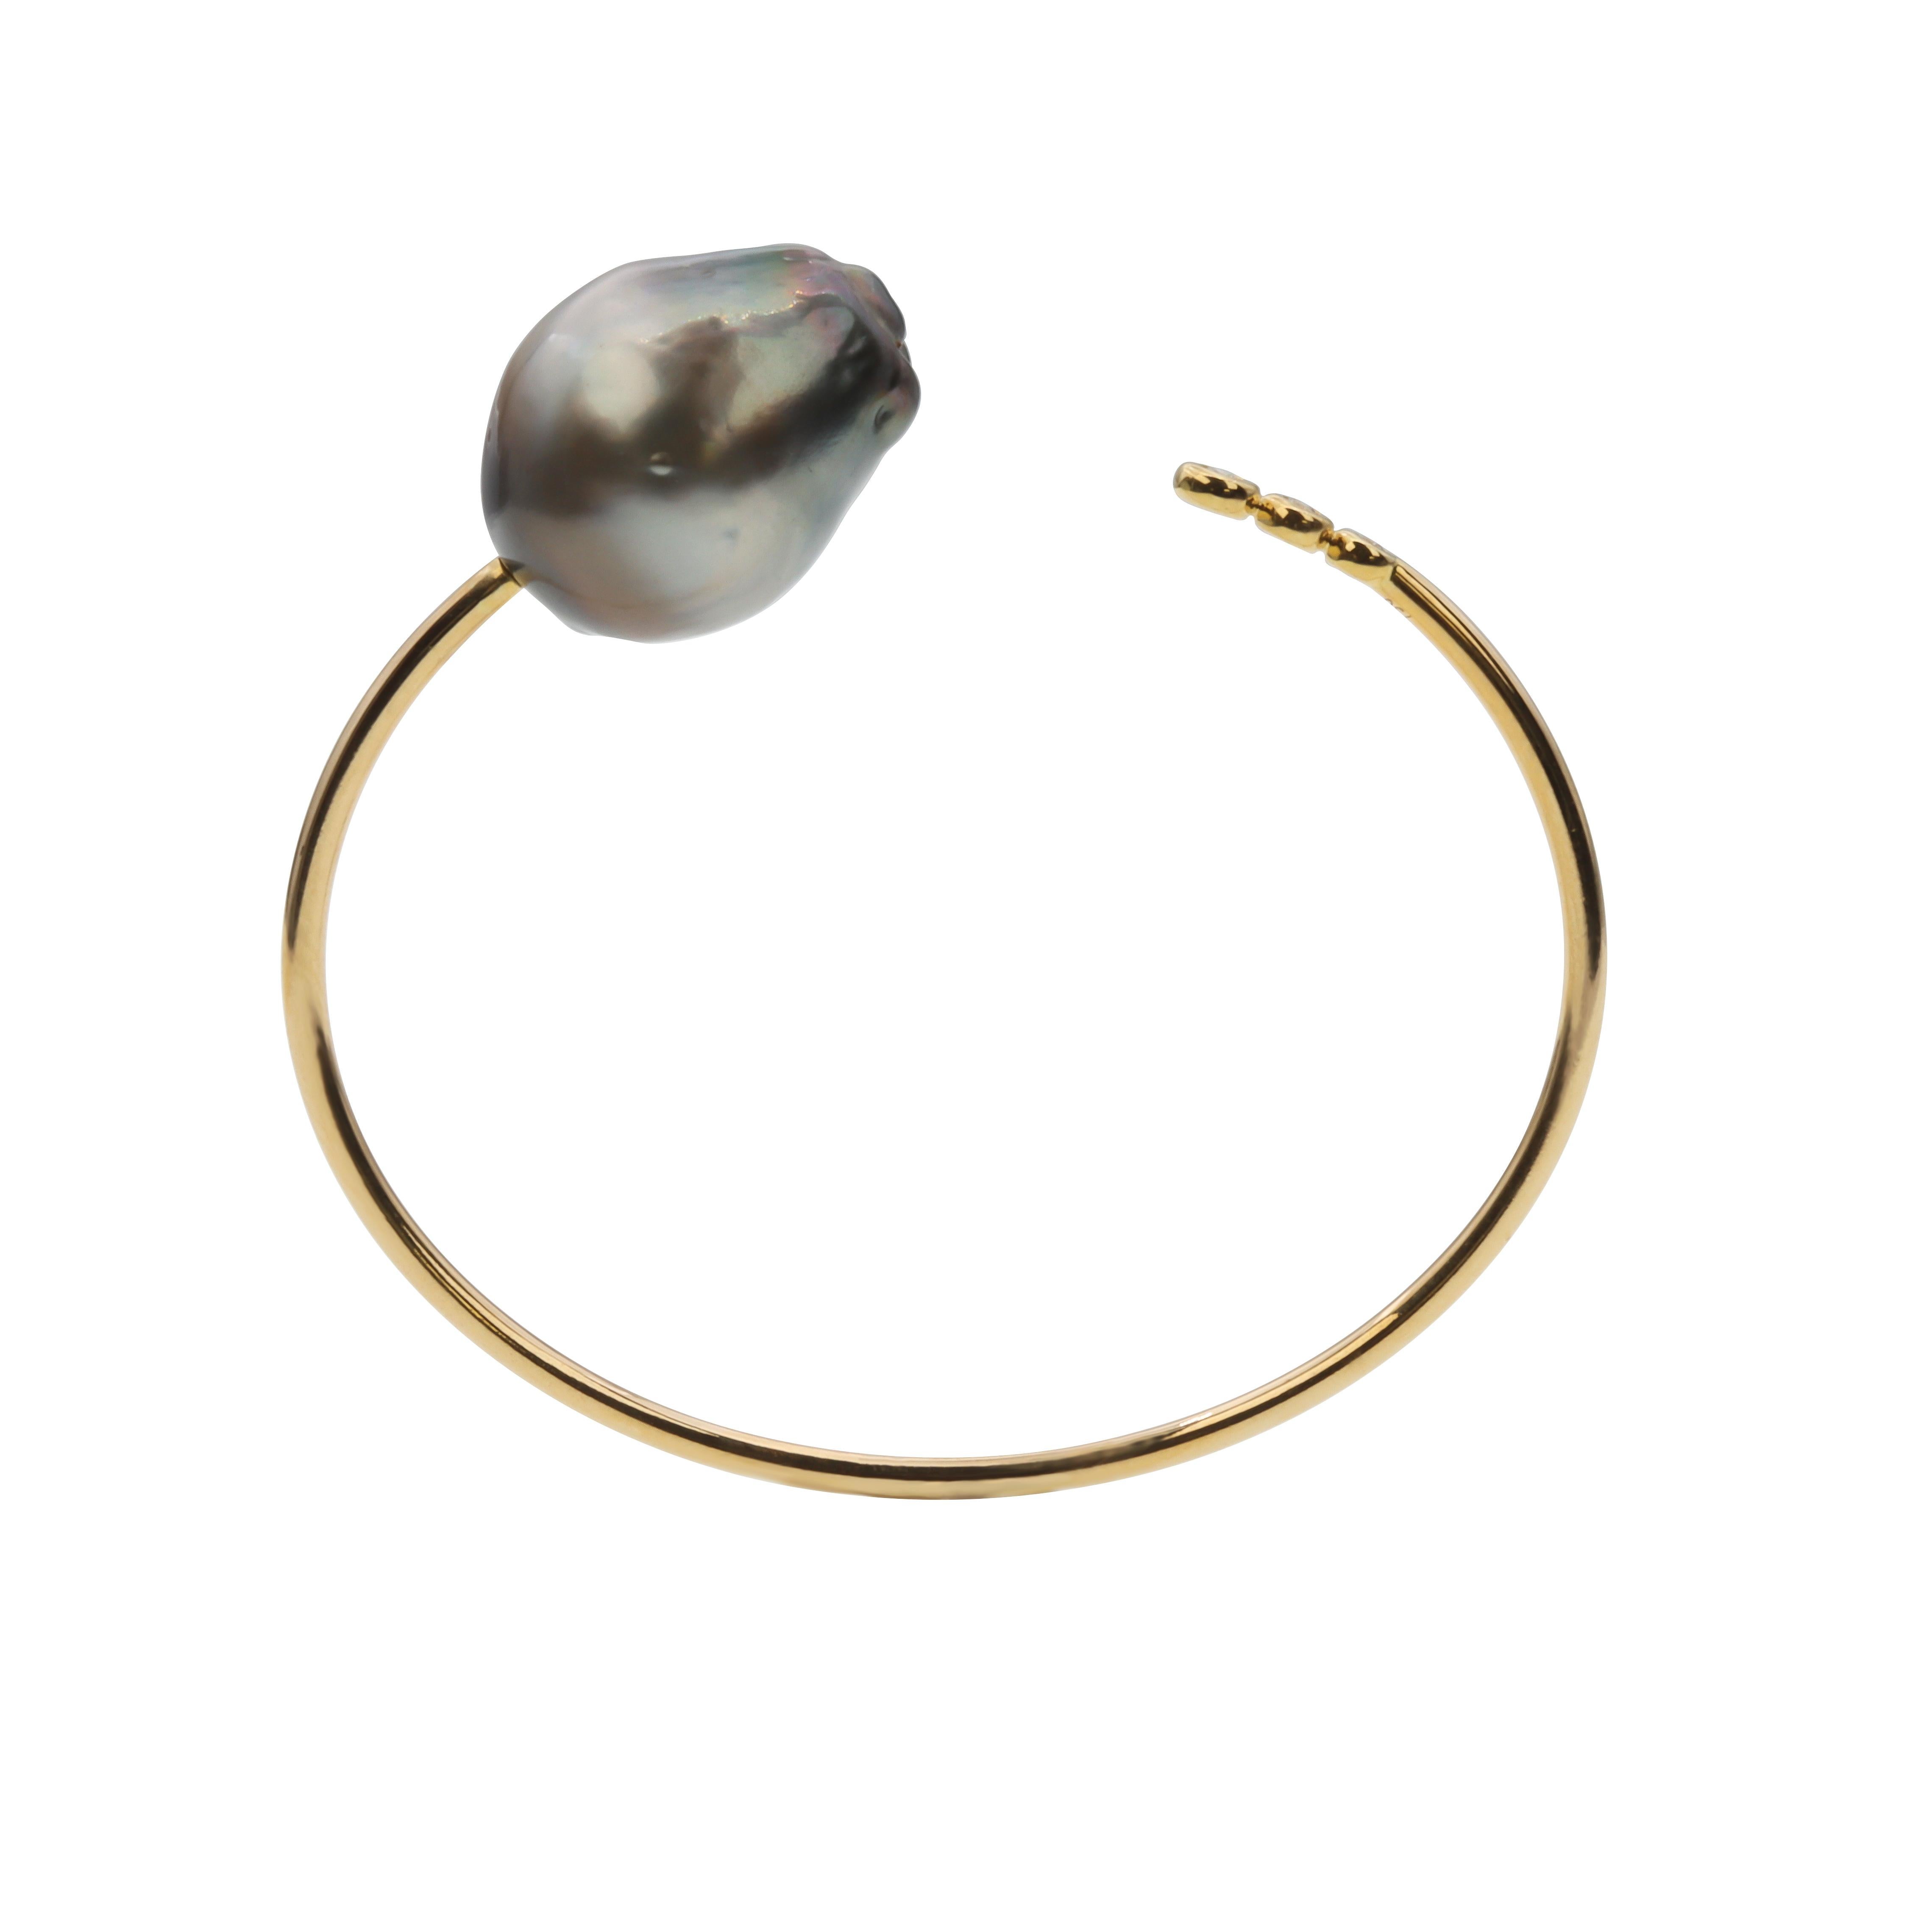 Aventina-Spencer, in collaboration with Marc'Harit- Finder of Pearls, present the 'Cosmo' bracelet designed by Kira Kampmann. The 'Cosmo' Bangle is designed with flexible 18K yellow gold and features an exquisite 17mm Conscious Baroque Tahitian